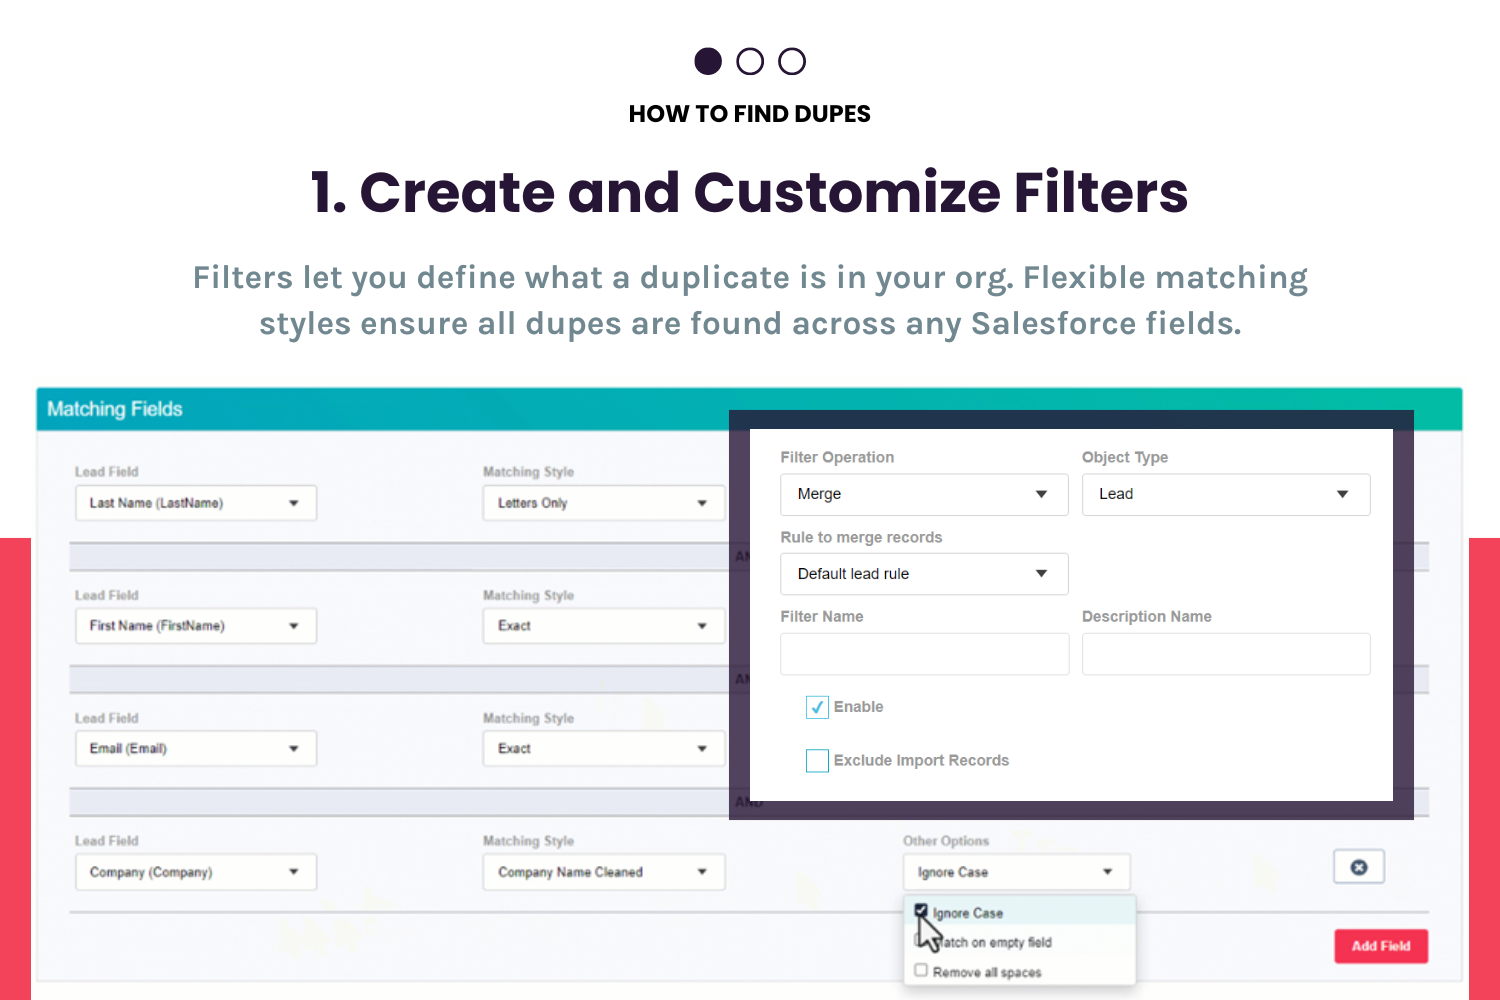 Step 1 to Deduping: Create and Customize Filters